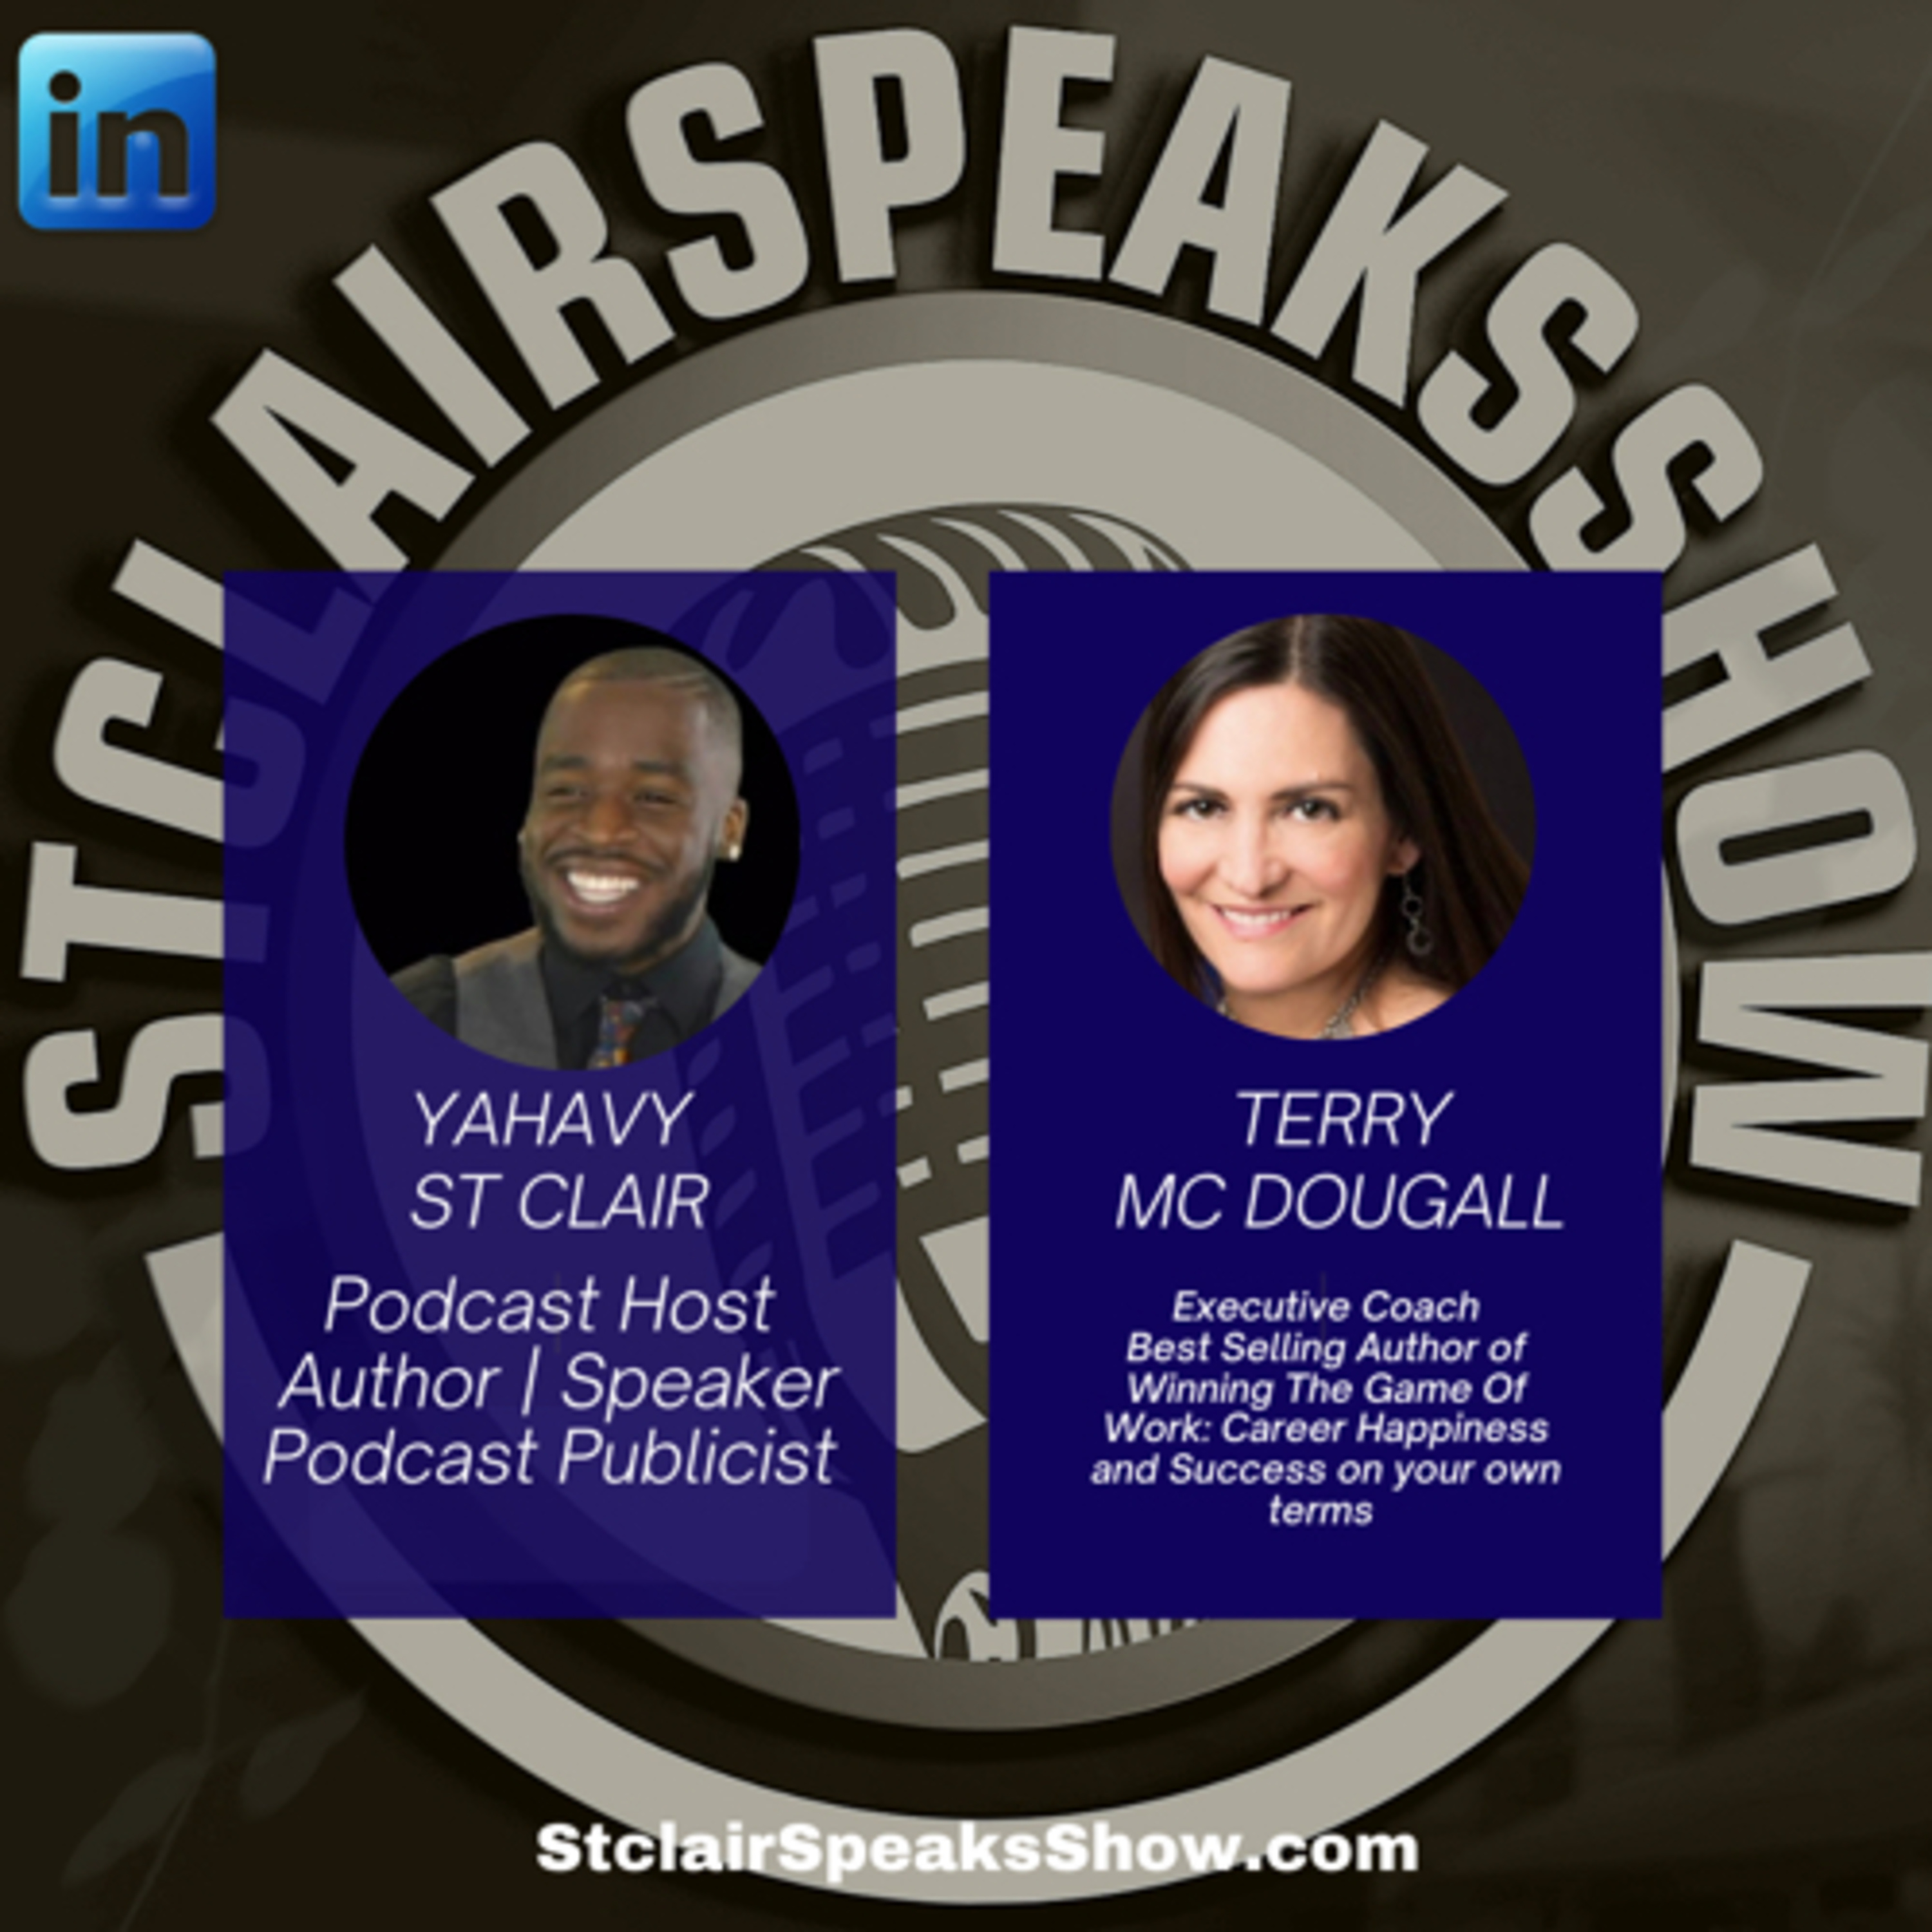 The StclairSpeaksShow Featuring Terry Boyle McDougall Best Selling Author of Winning The Game of Work: Career Happiness and Success on your own terms."#Ep37 Image